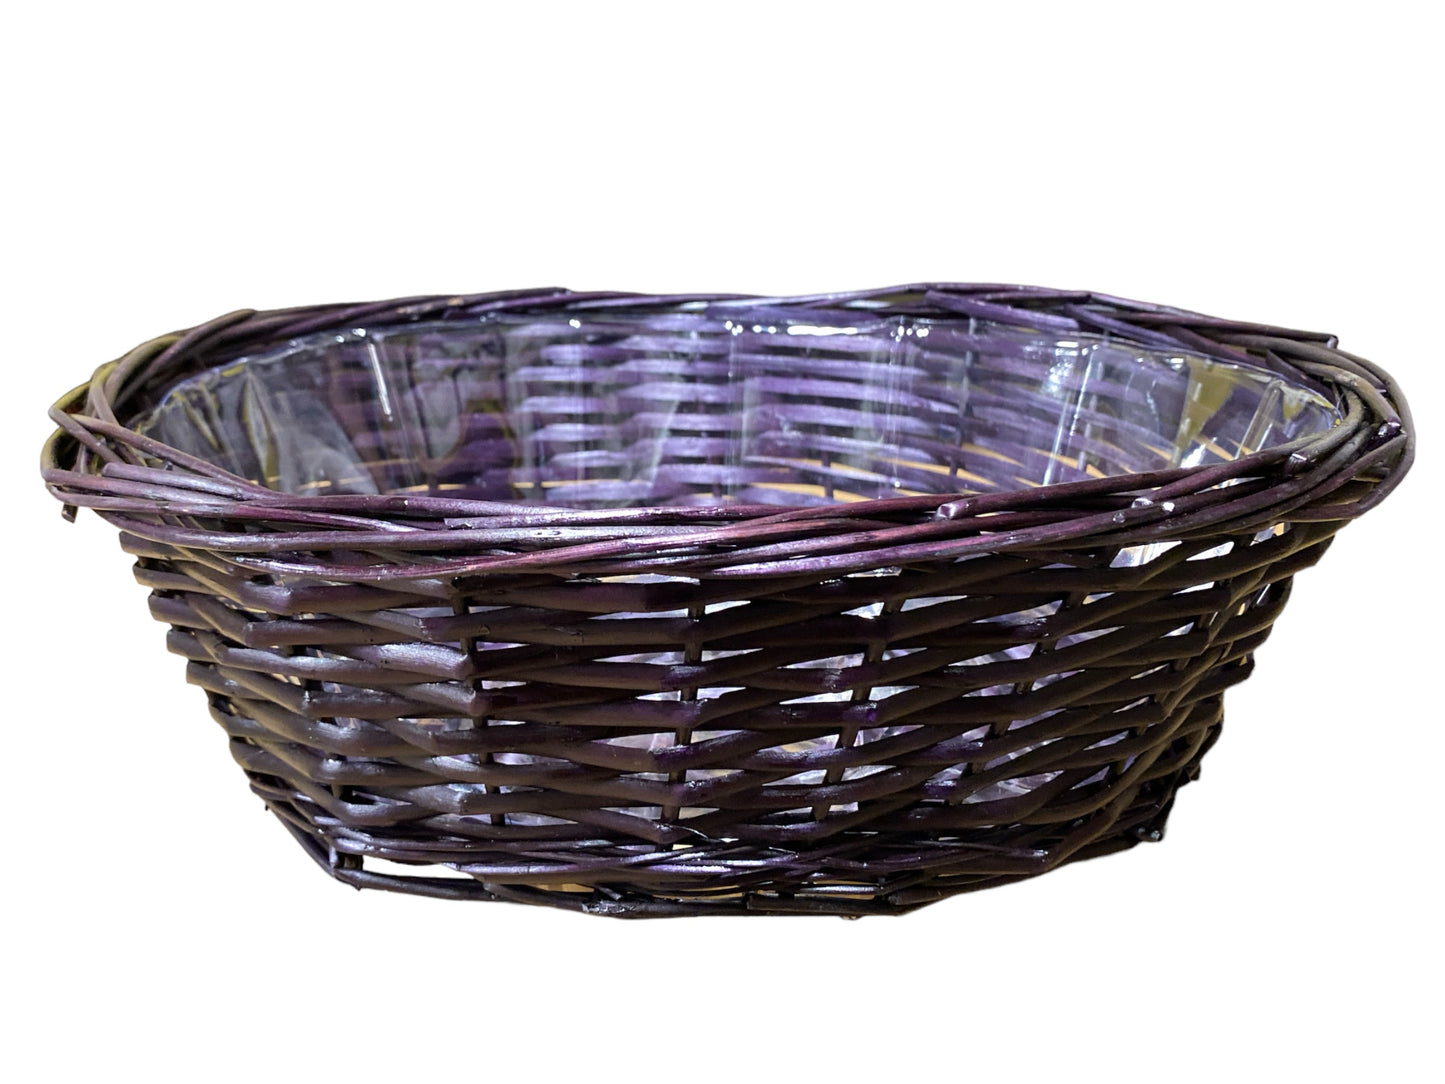 WILLOW OVAL TRAY - WINE - 14 x 5 inch deep - with Hard Liner - fits a 25x30 or 26x40 bag